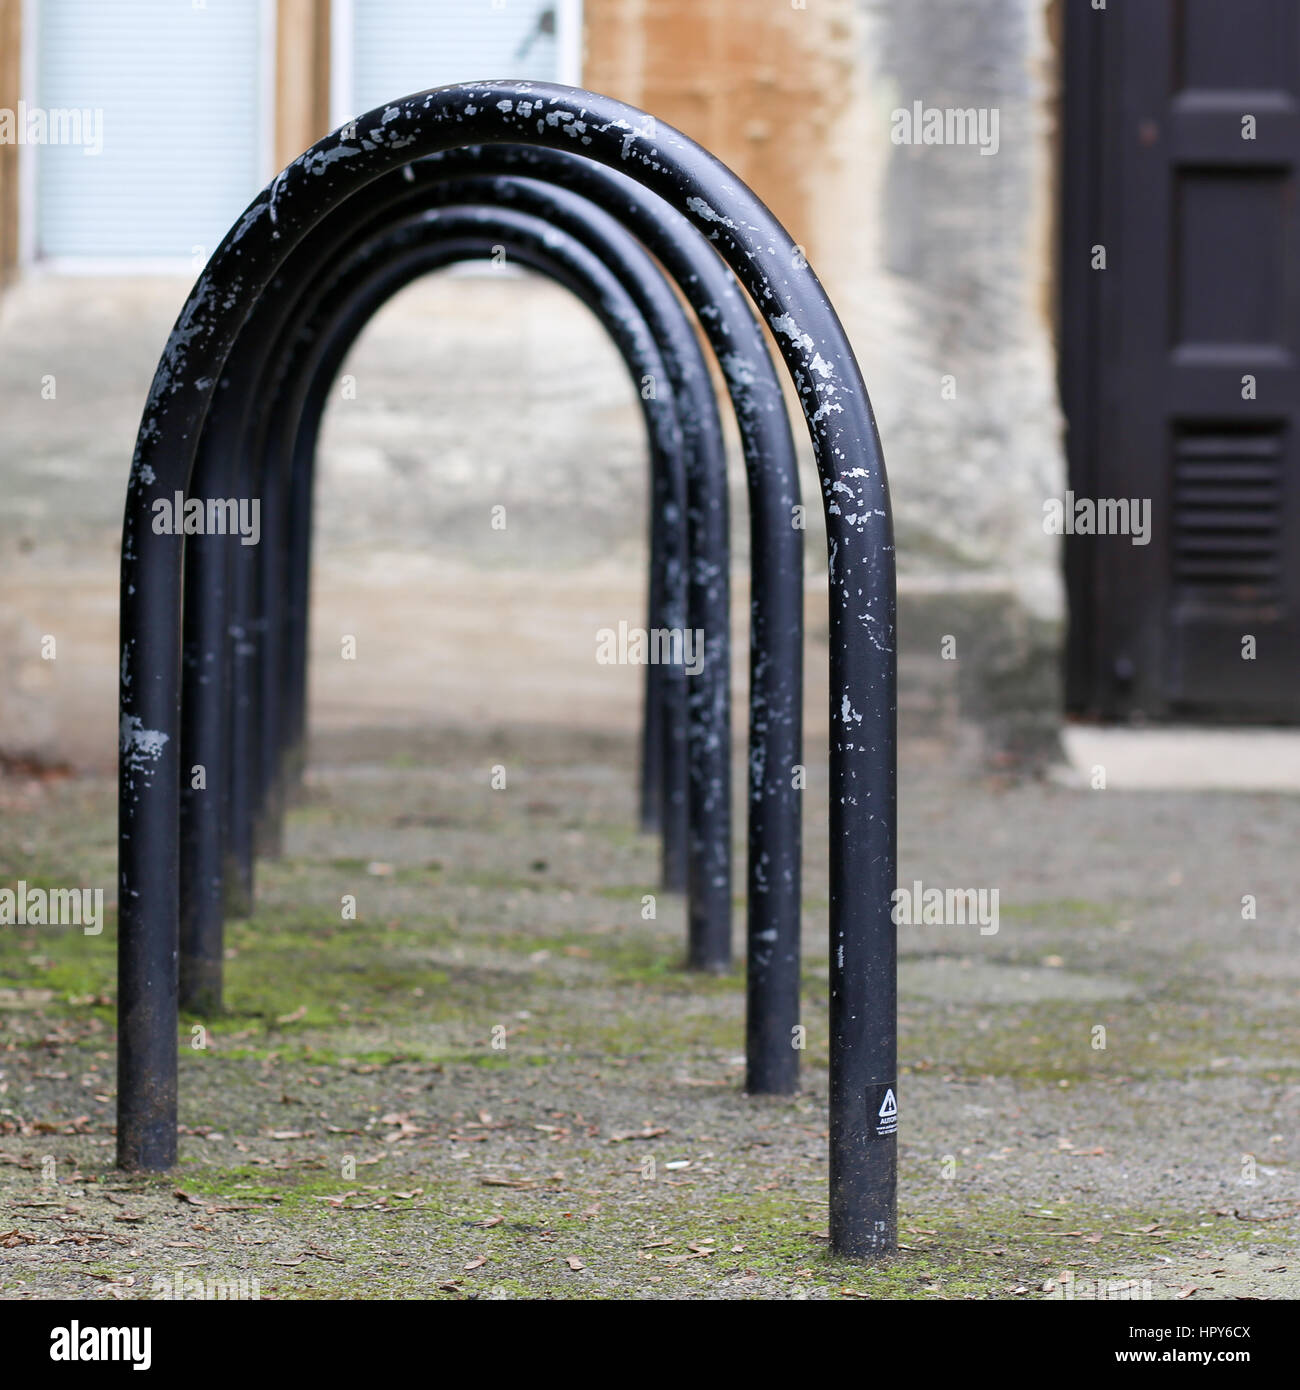 Jowett Walk, Oxford, United Kingdom, February 19, 2017: Empty black painted bicycle parking metal frames on the street in Oxford, England Stock Photo